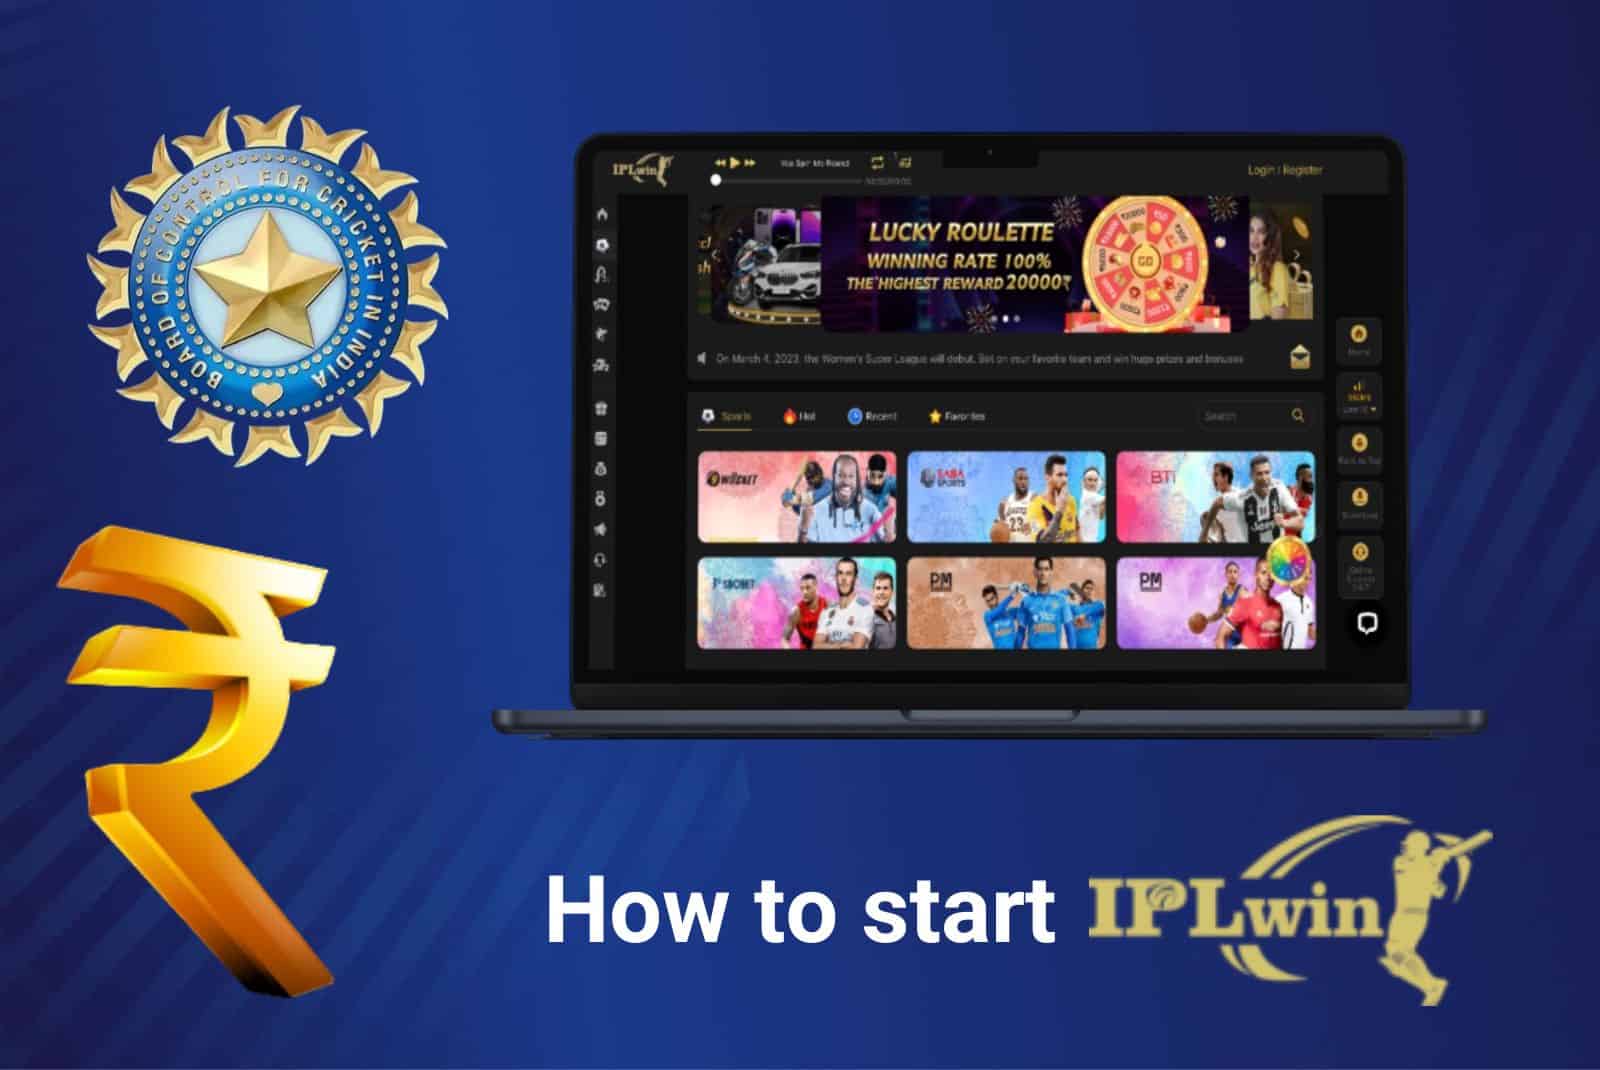 3 Tips About IPL cricket betting app You Can't Afford To Miss